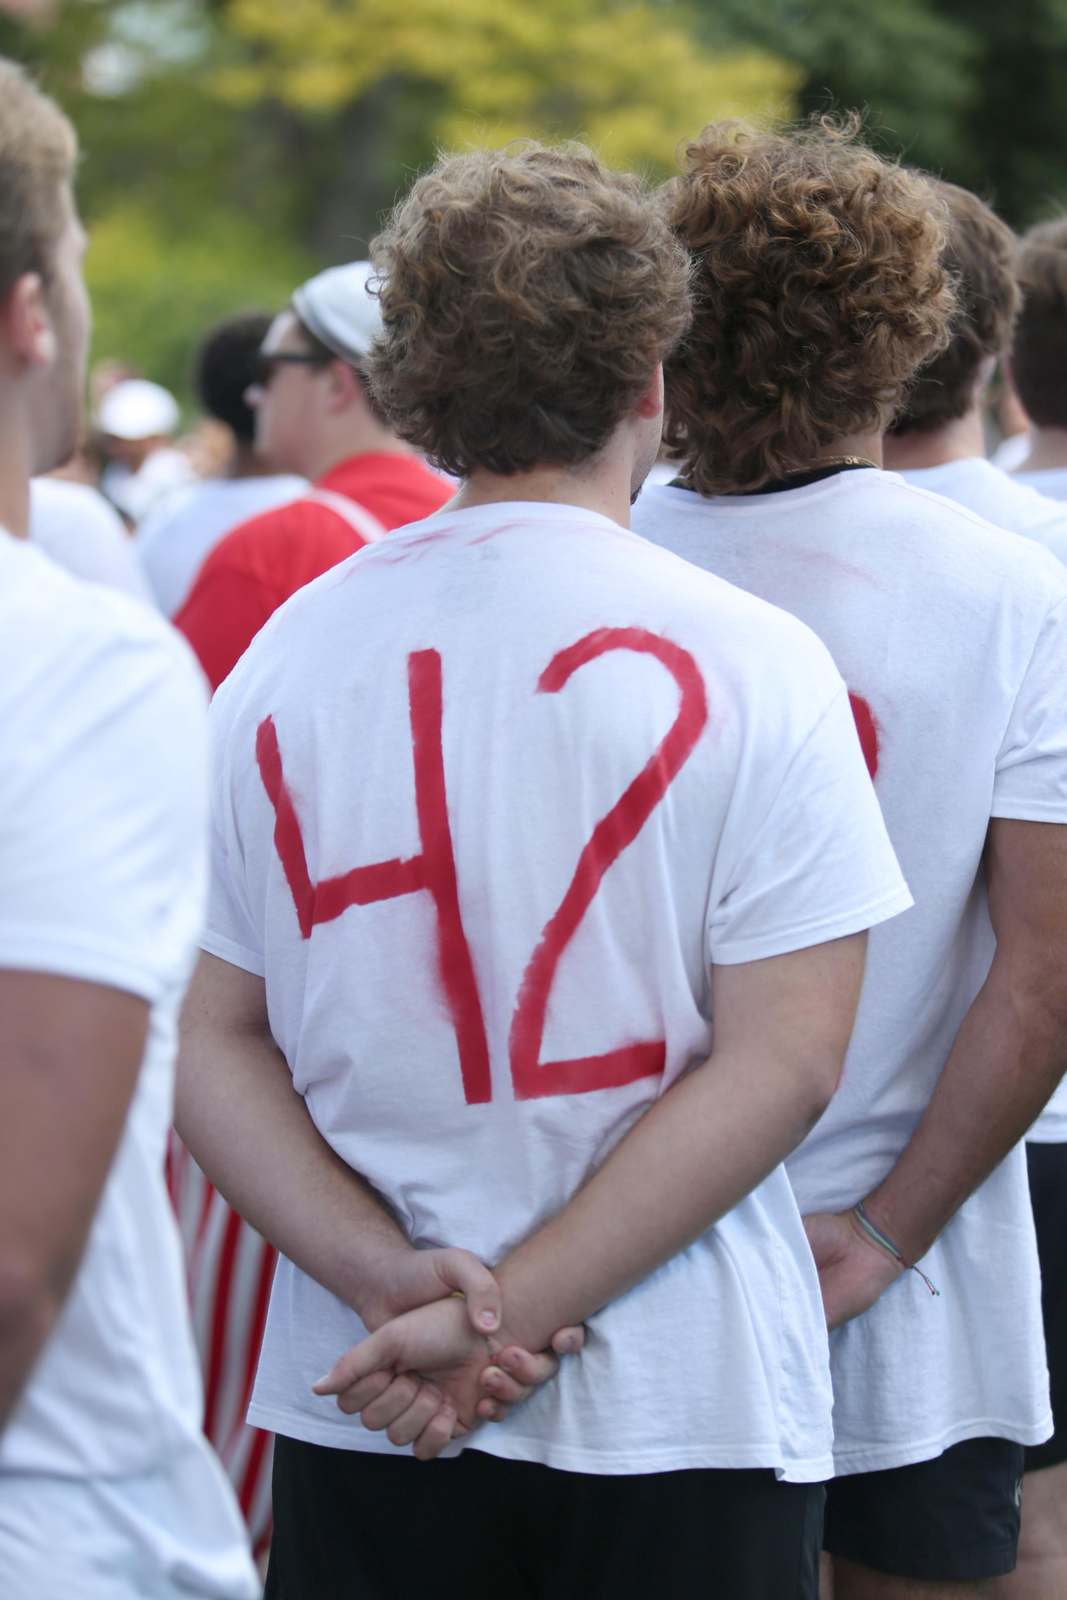 a group of people wearing white t-shirts with red writing on their back